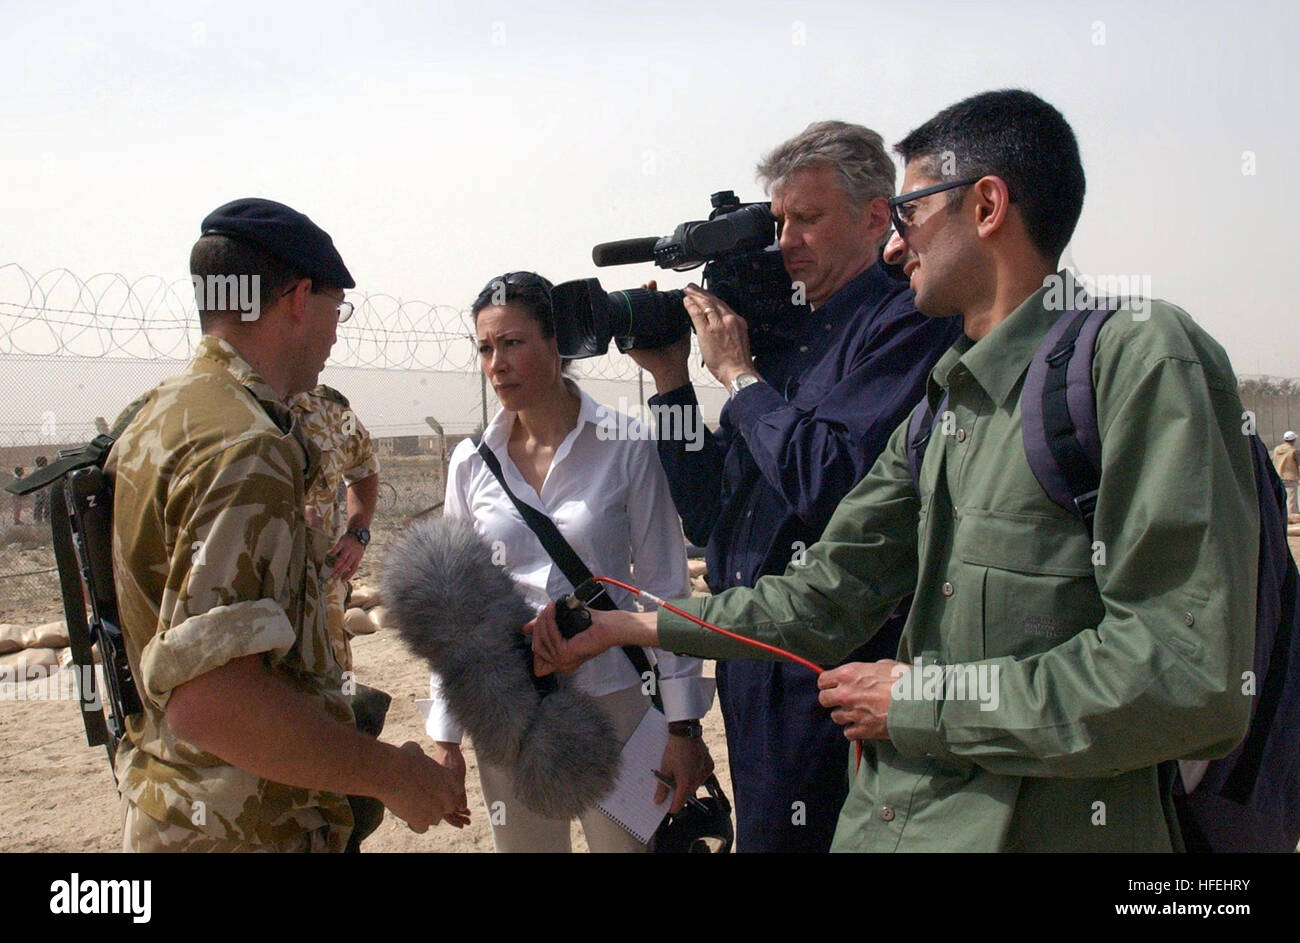 030331-N-5362A-012 Umm Qasr, Iraq (Mar. 31, 2003) -- A member of the British Royal Marines speaks to NBC's Today's show anchor Ann Curry about the recent arrival of water and food supplies by British and American troops at Iraq's southern port city of Umm Qasr.   Operation Iraqi Freedom is the multinational coalition effort to liberate the Iraqi people, eliminate Iraq's weapons of mass destruction and end the regime of Saddam Hussein.  U.S. Navy photo by Photographer's Mate 1st Class Arlo K. Abrahamson.  (RELEASED) US Navy 030331-N-5362A-012 A member of the British Royal Marines speaks to NBC' Stock Photo